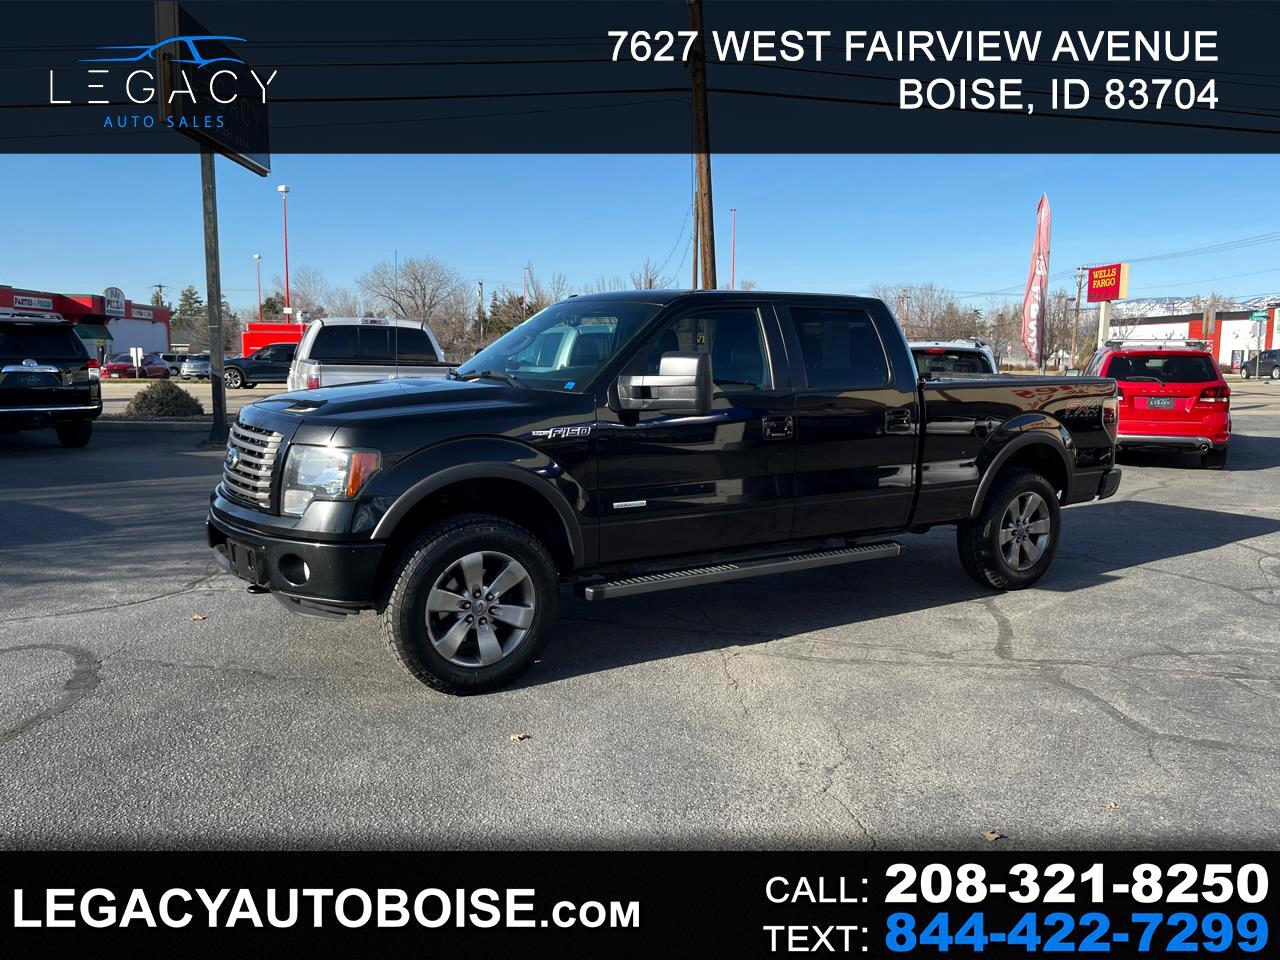 2012 Ford F-150 SuperCrew 139" FX4 4WD